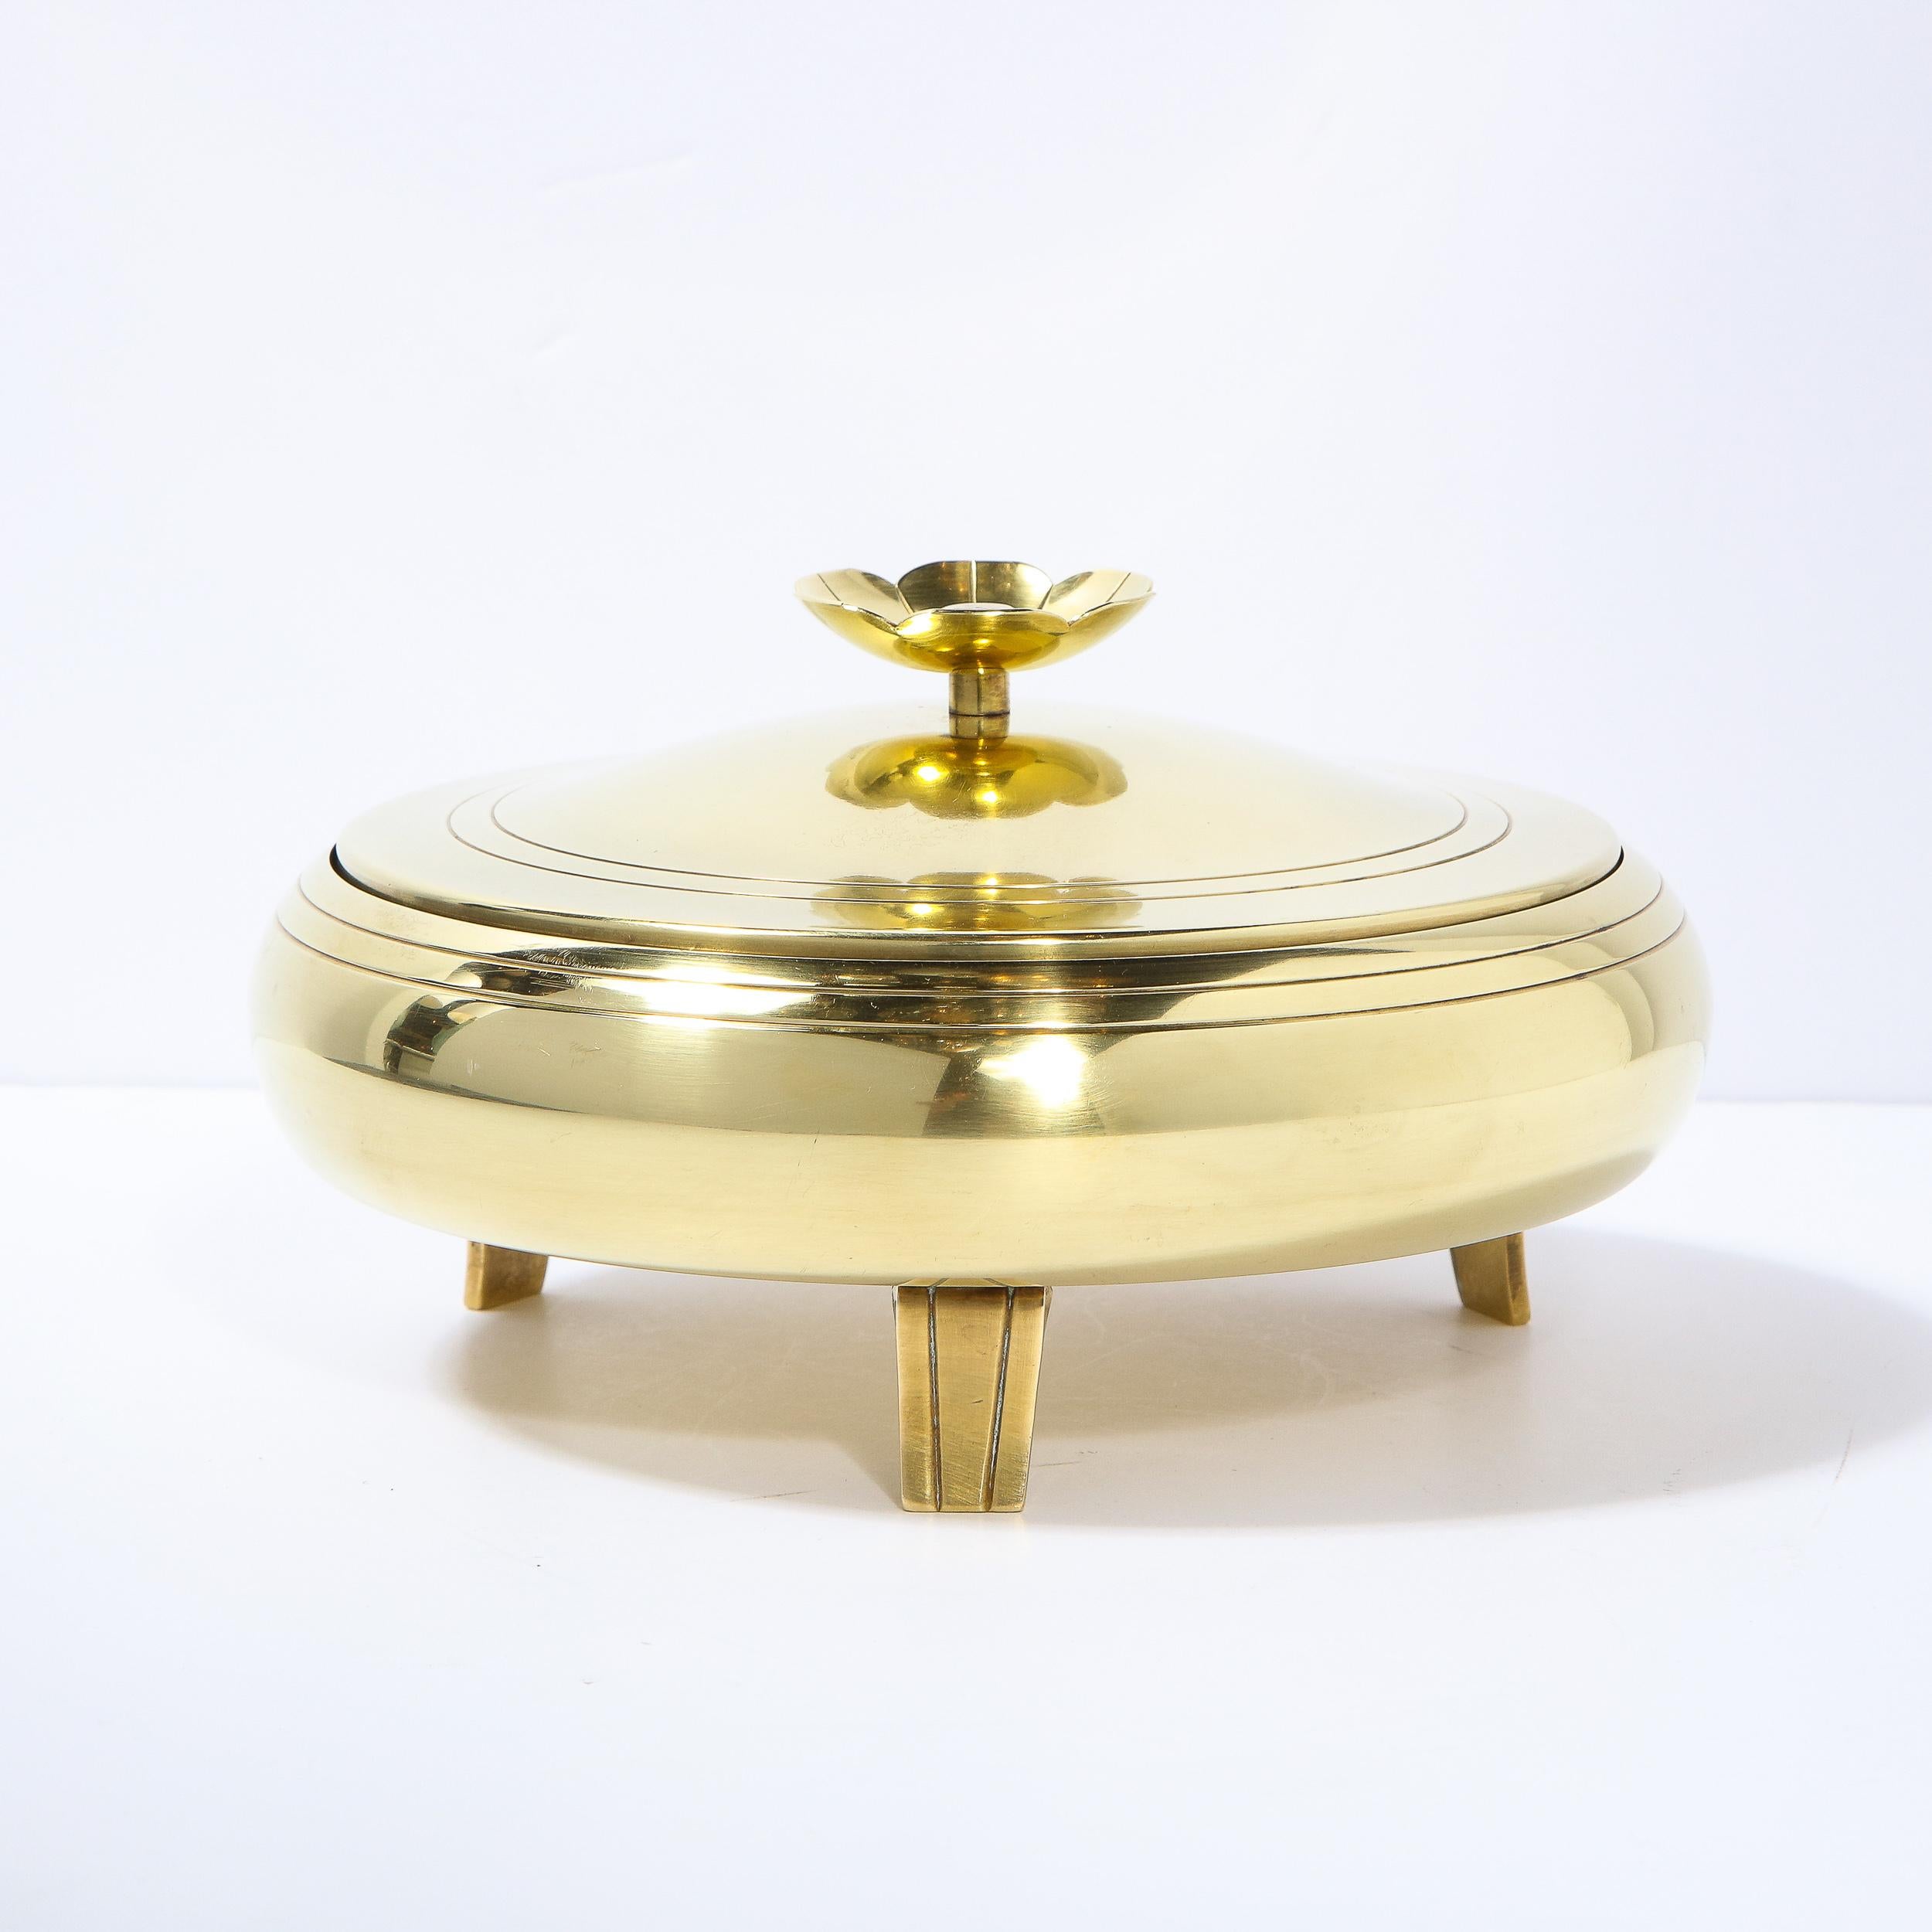 This elegant Mid-Century Modern polished brass bowl was designed by Tommi Parzinger for Dorlyn Silversmiths in the United States circa 1960. It features a circular body with banding detail around the perimeter and a matching lid (also banded) that